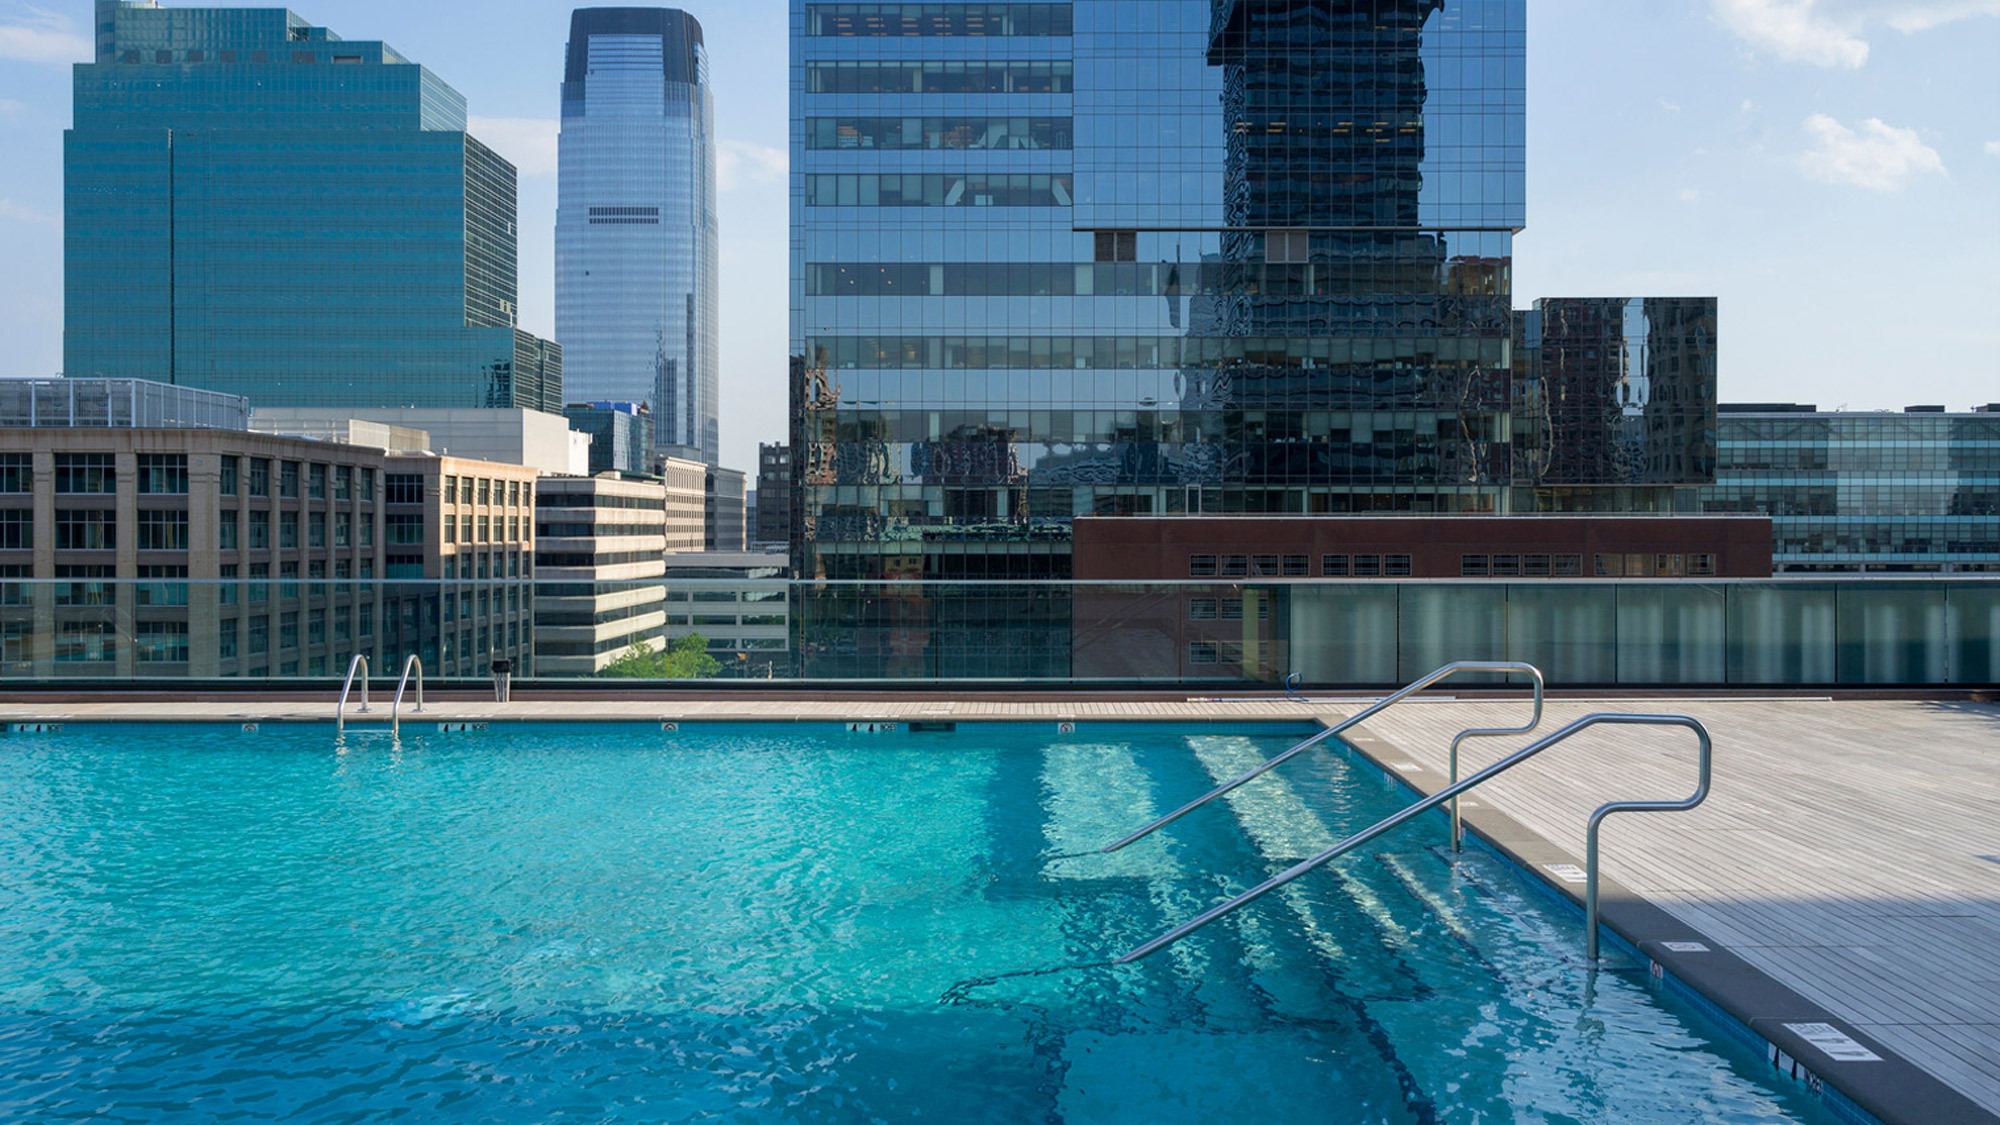 Rooftop swimming pool with a glass safety barrier providing a clear view of the surrounding cityscape. Modern buildings reflect in the water, enhancing the urban oasis vibe. Steel handrails and wooden deck add to the sleek, contemporary design.